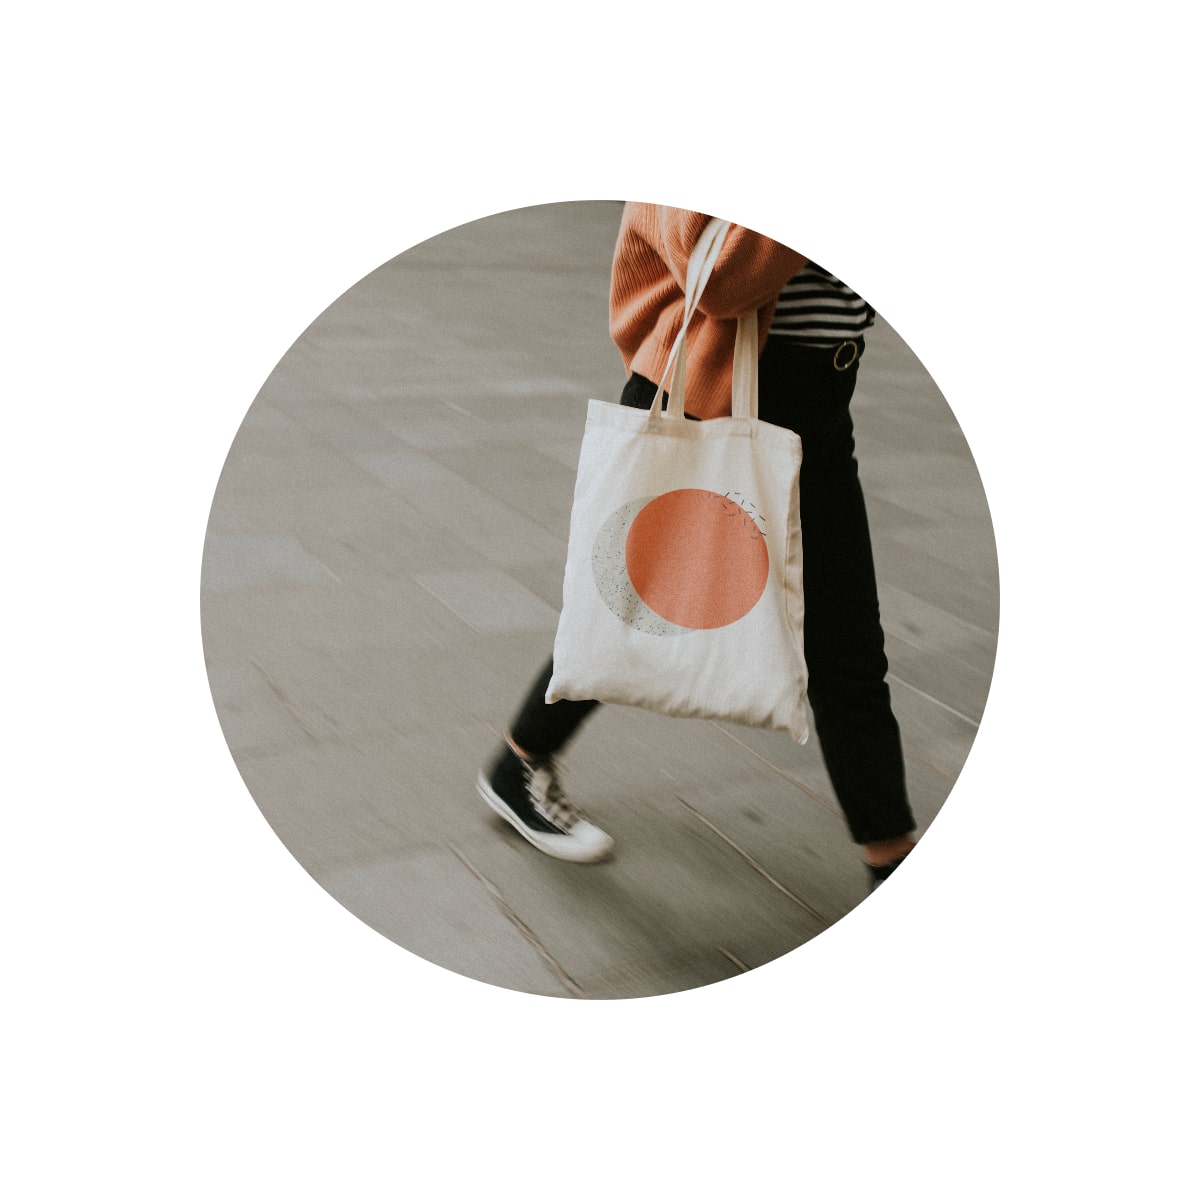 How do I choose the right tote bag?